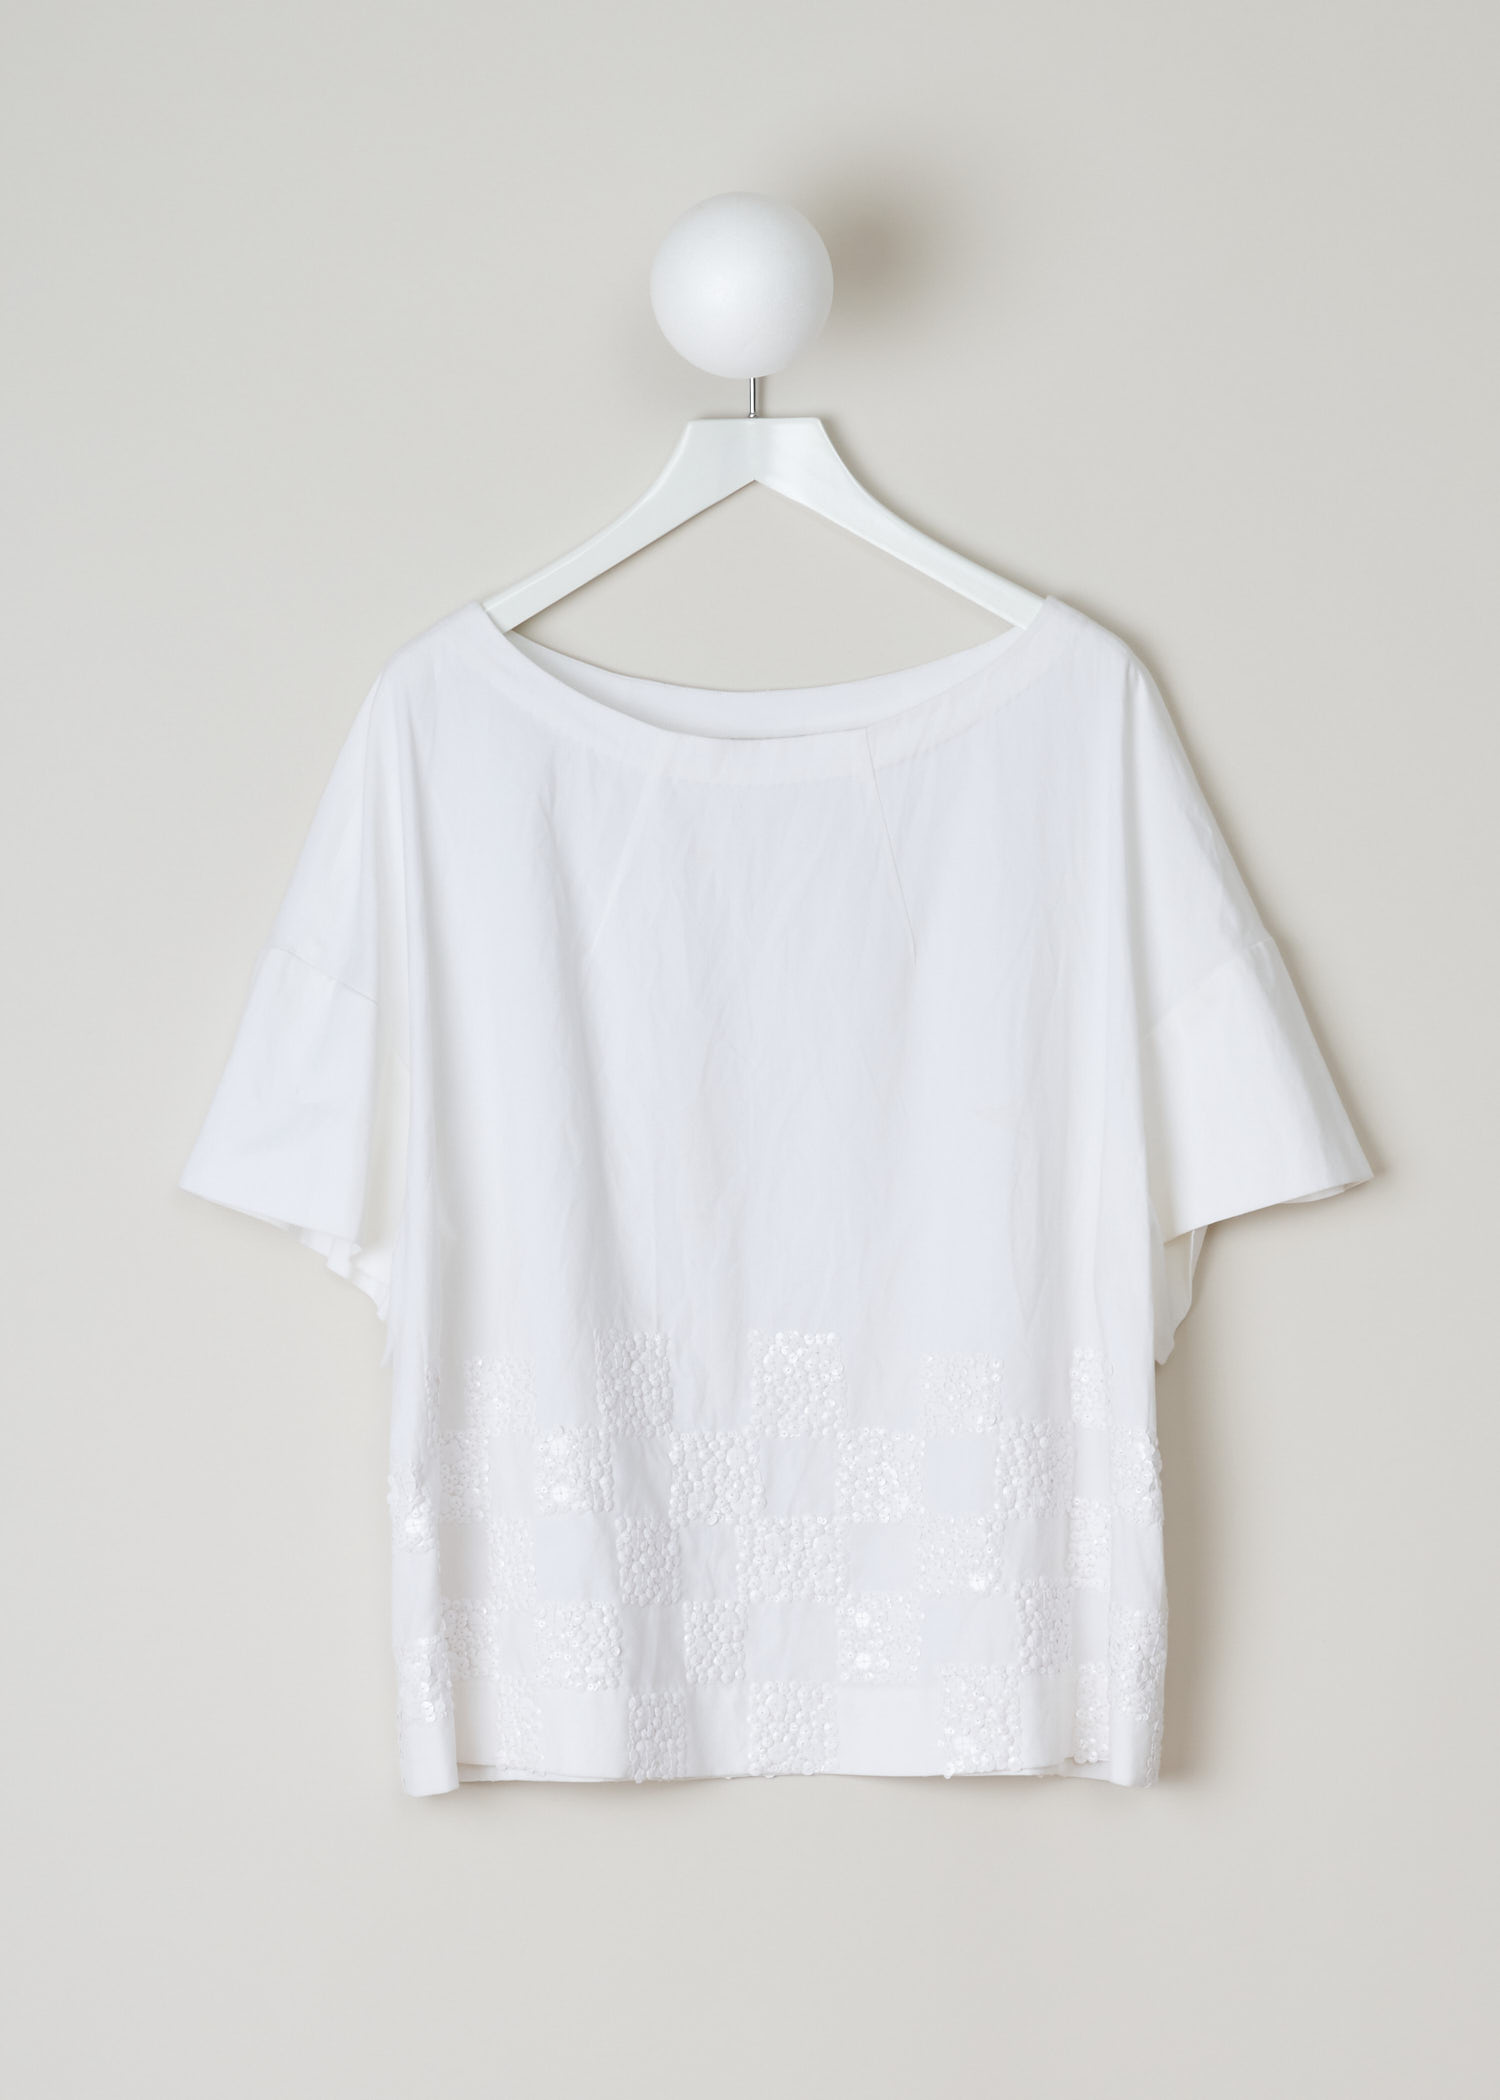 Dries Van Noten, White sequins top, COBALA_EMB_7327_WW_SHIRT_WHI, white, front, This wide crew neck top is made with sequins on the lower half of the top. The sleeves are also made wide to match the neck line. 